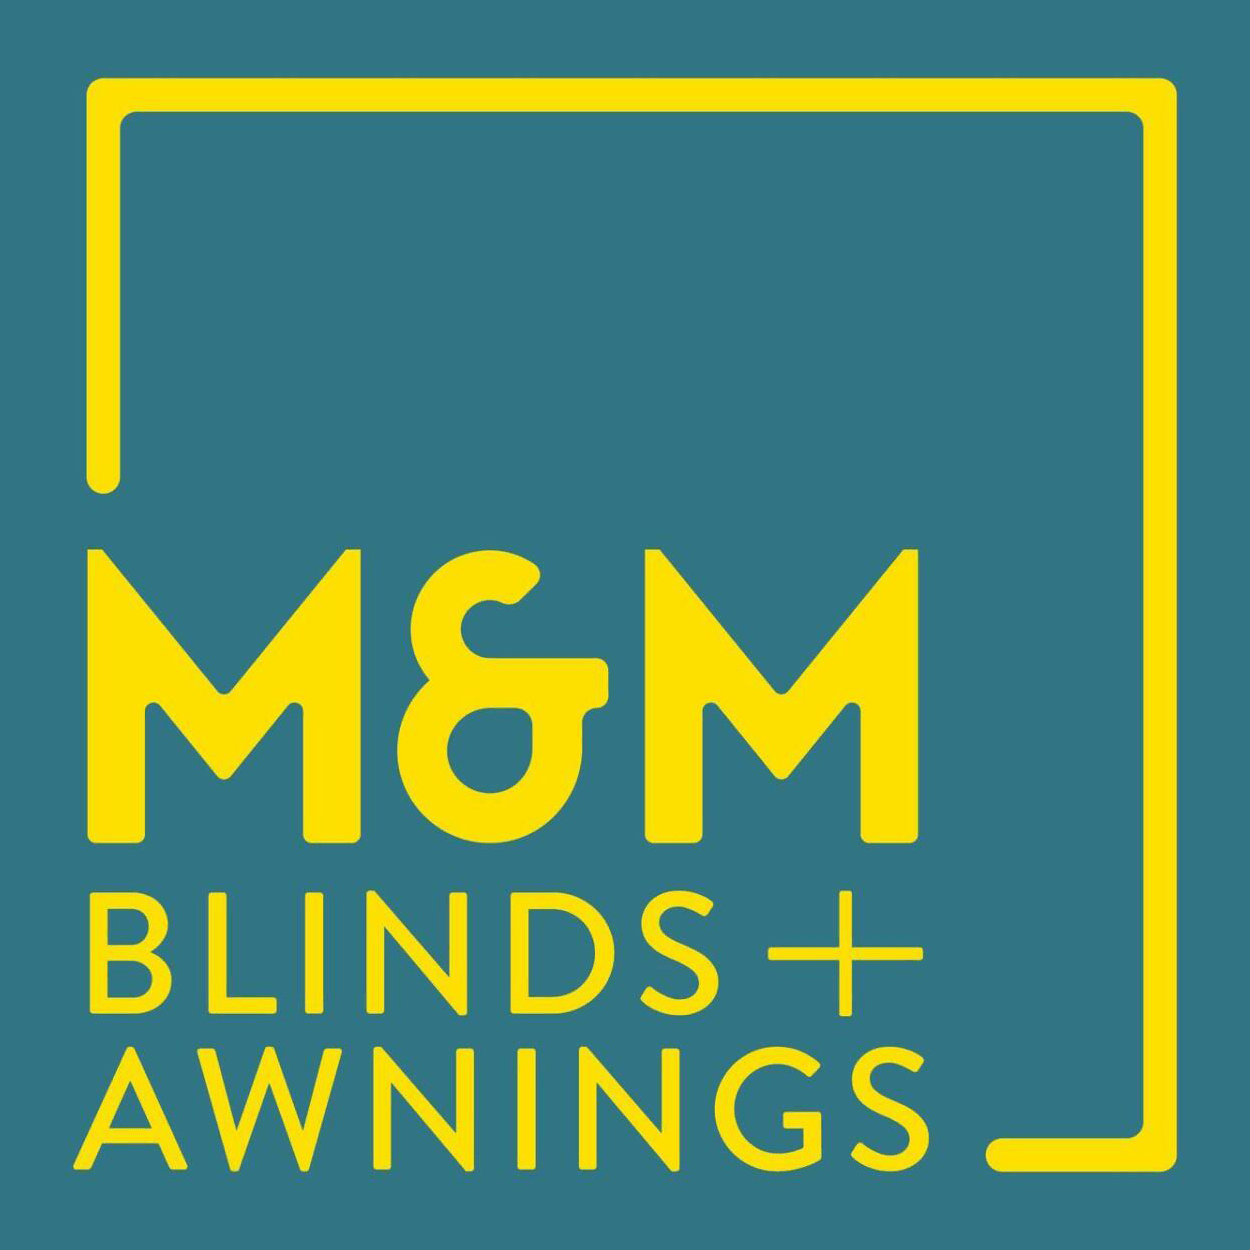 M & M Blinds & Awnings: Blinds, Awnings & Shutters